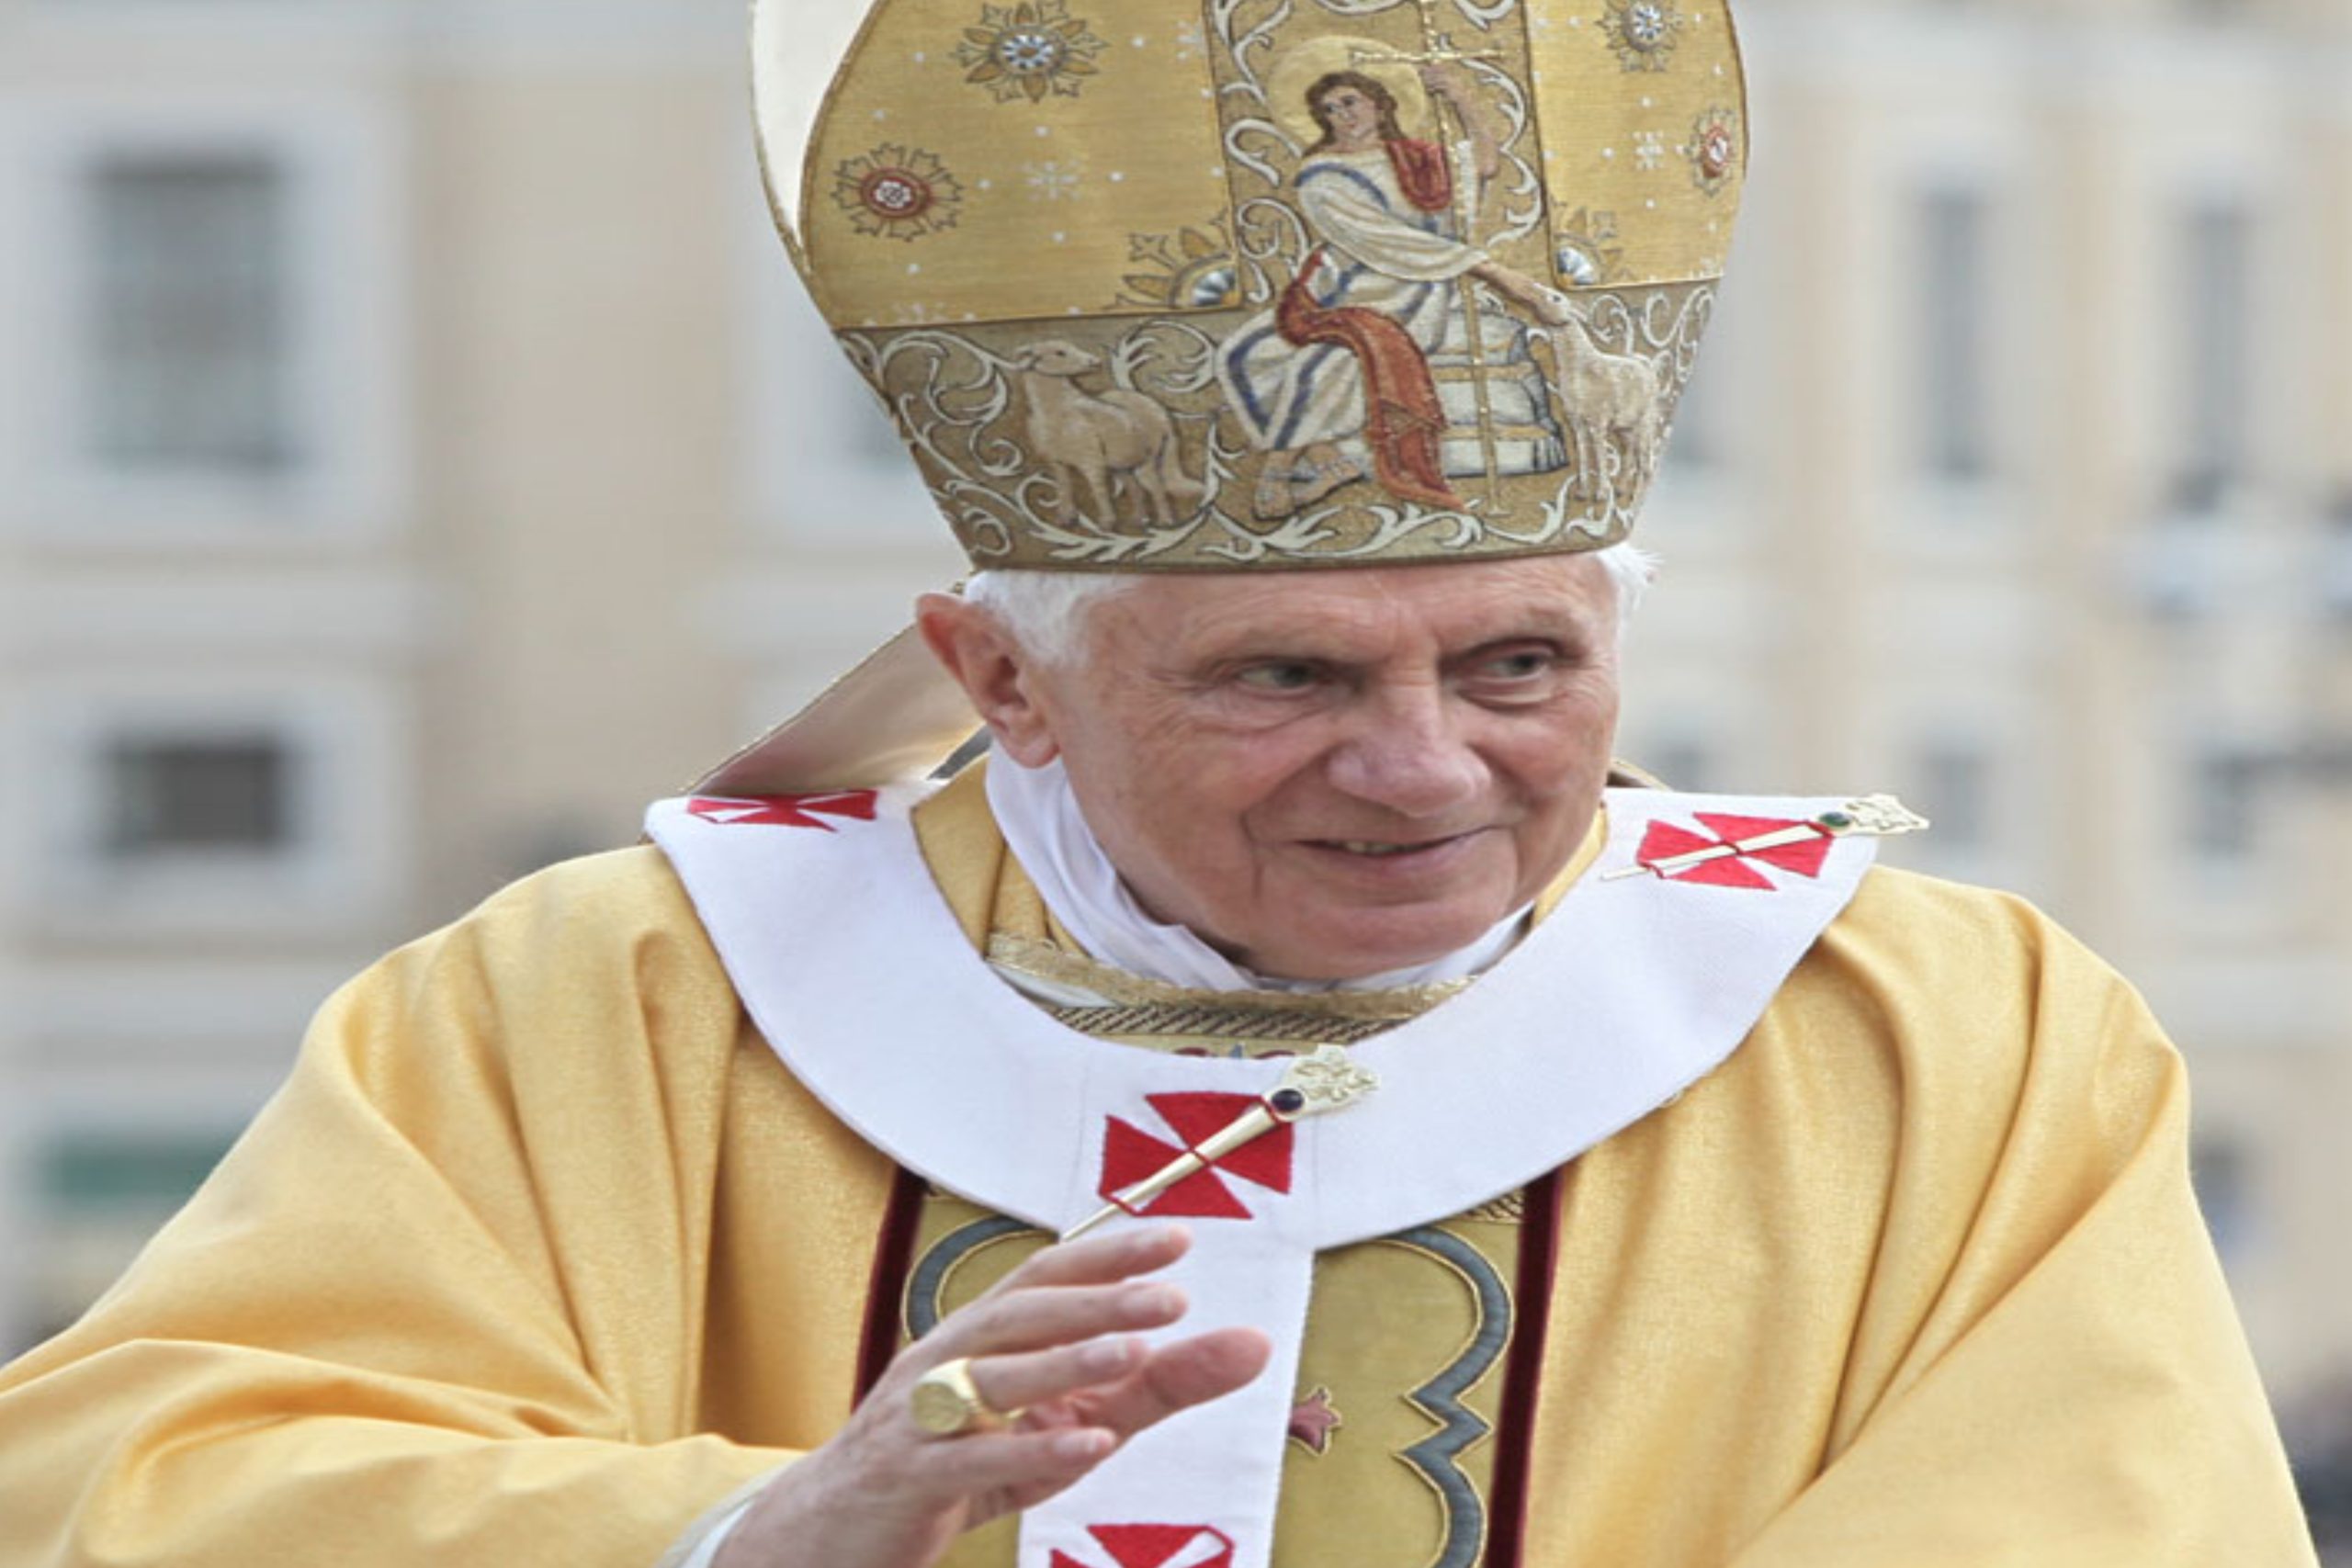 Vatican announces death of former Pope Benedict XVI, aged 95